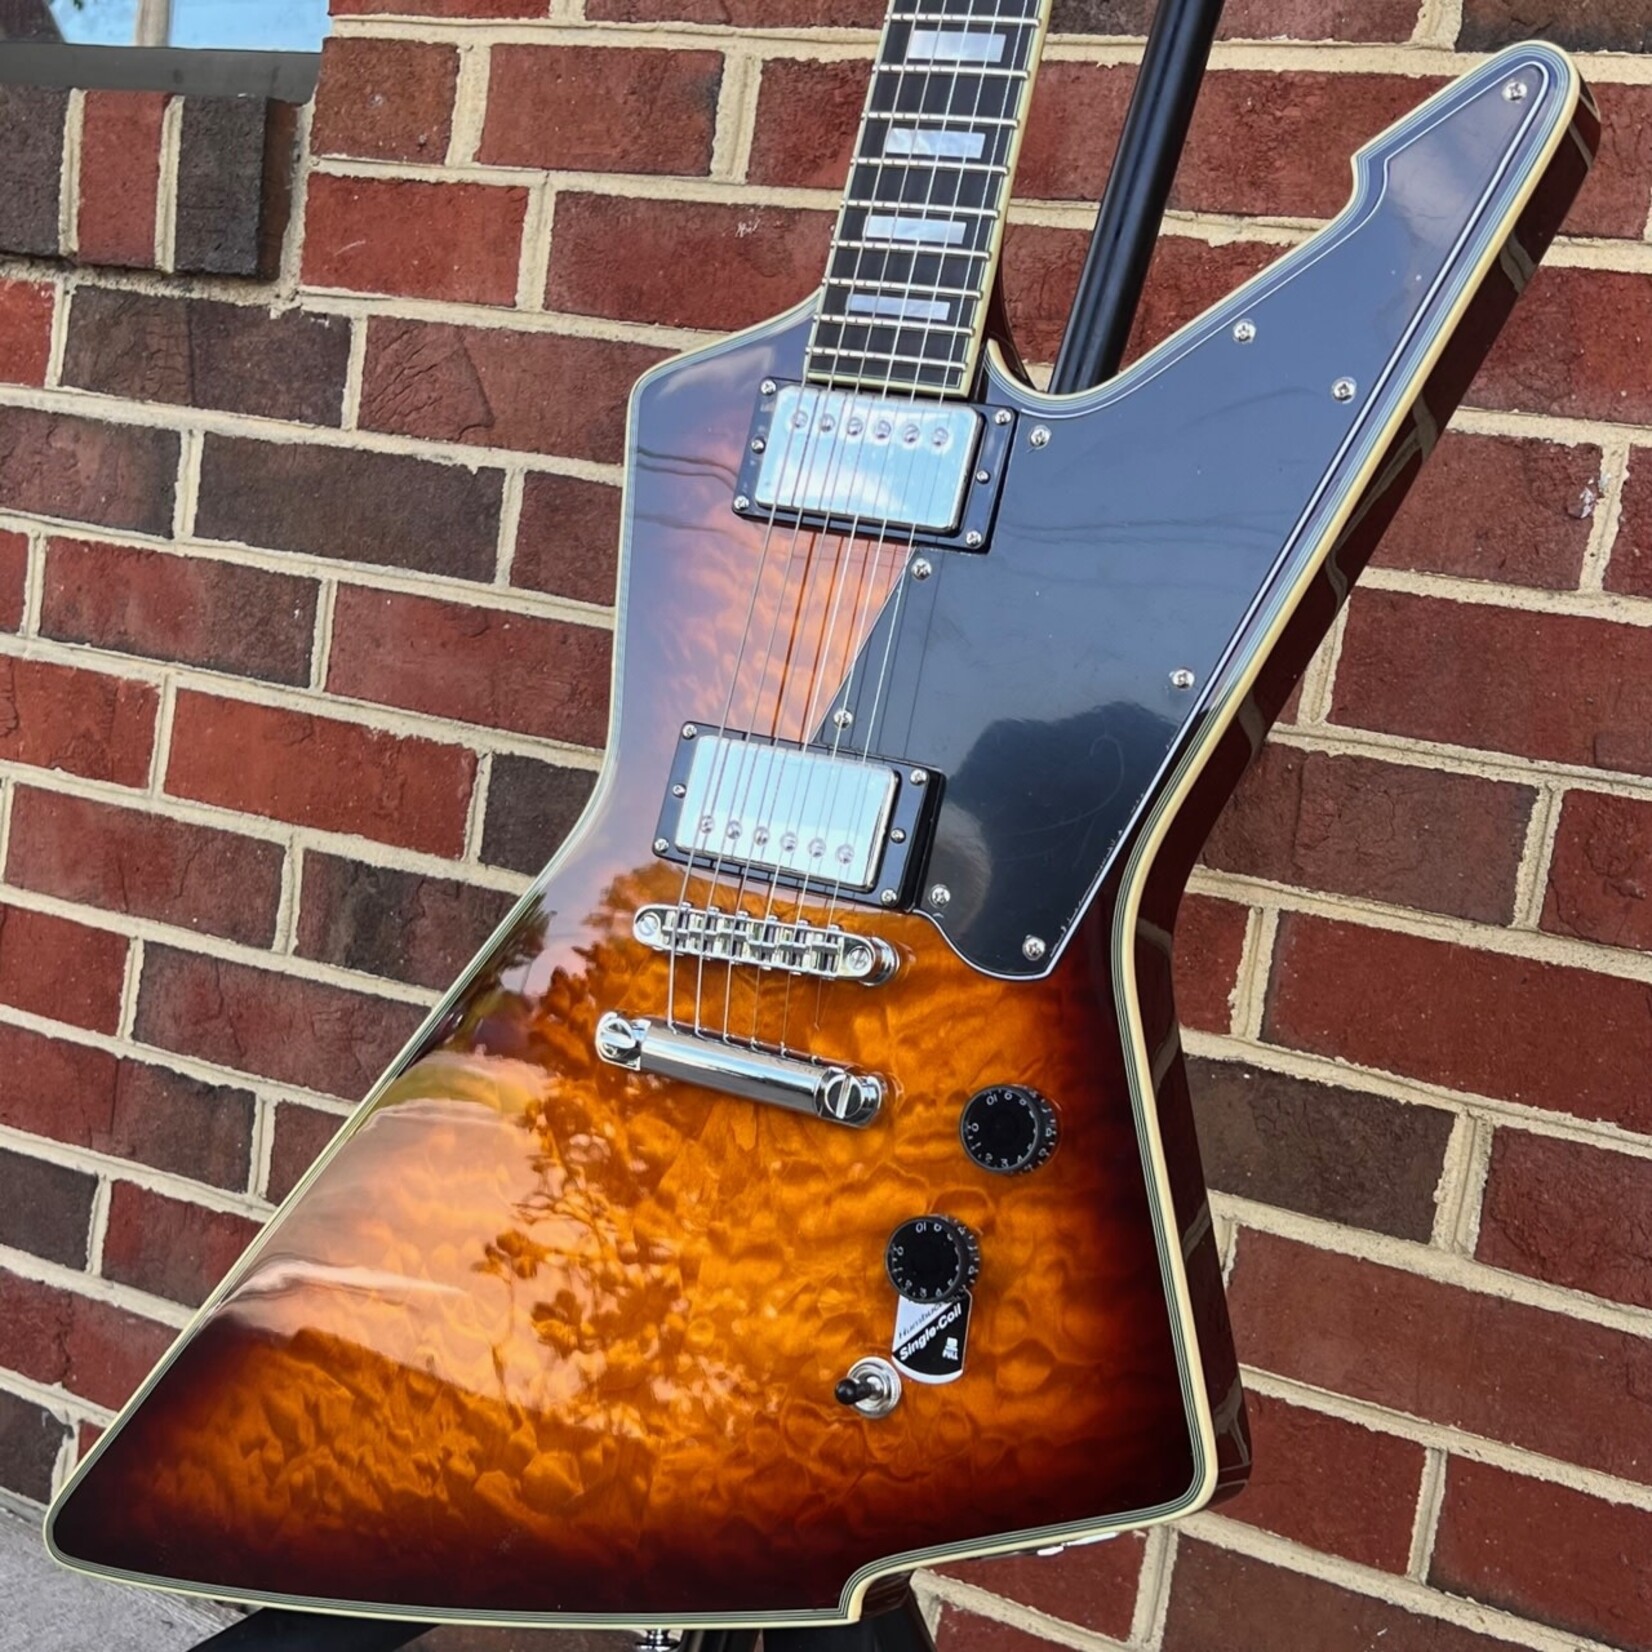 Schecter Guitar Research Schecter E-1 Custom, Vintage Sunburst, Quilted Maple Top, Ebony Fretboard, Locking Tuners, Schecter USA Sunset Strip/Pasadena Pickups, SN# W23051951